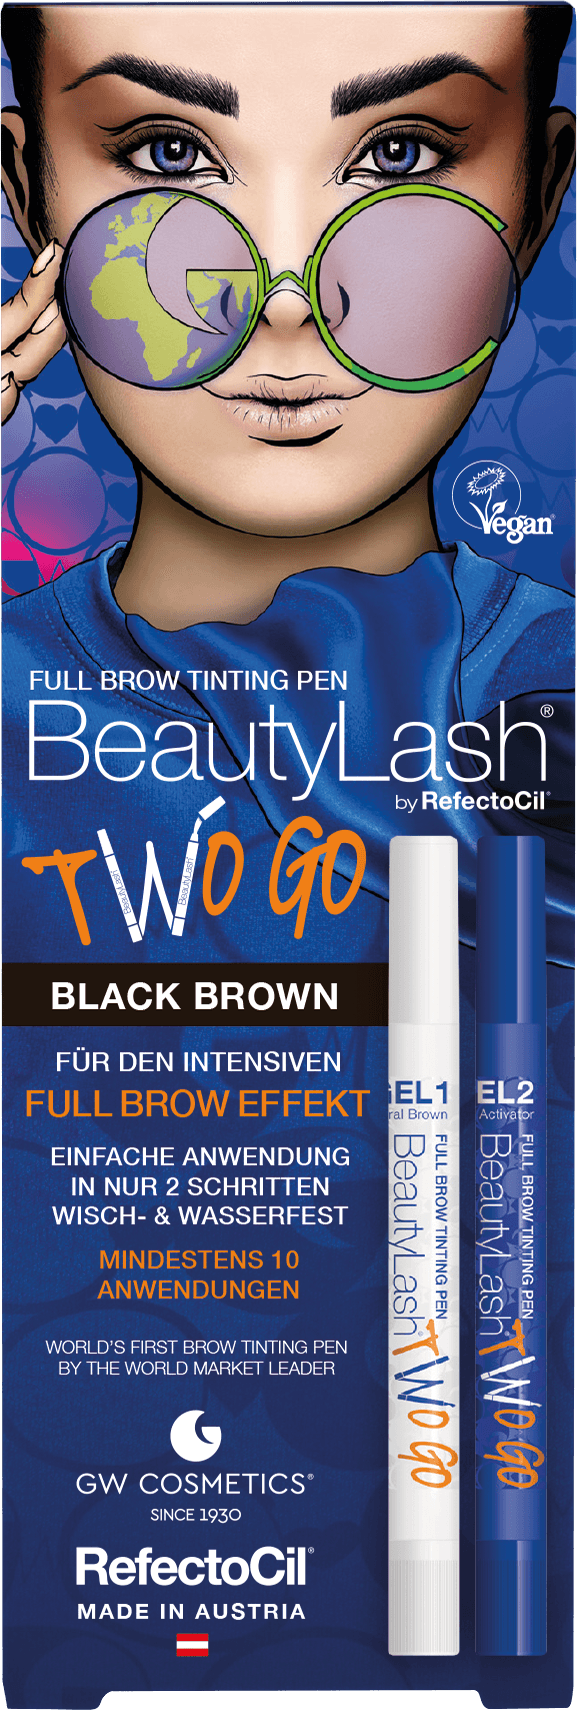  - Full Brow Tinting Pen Two Go - Black Brown